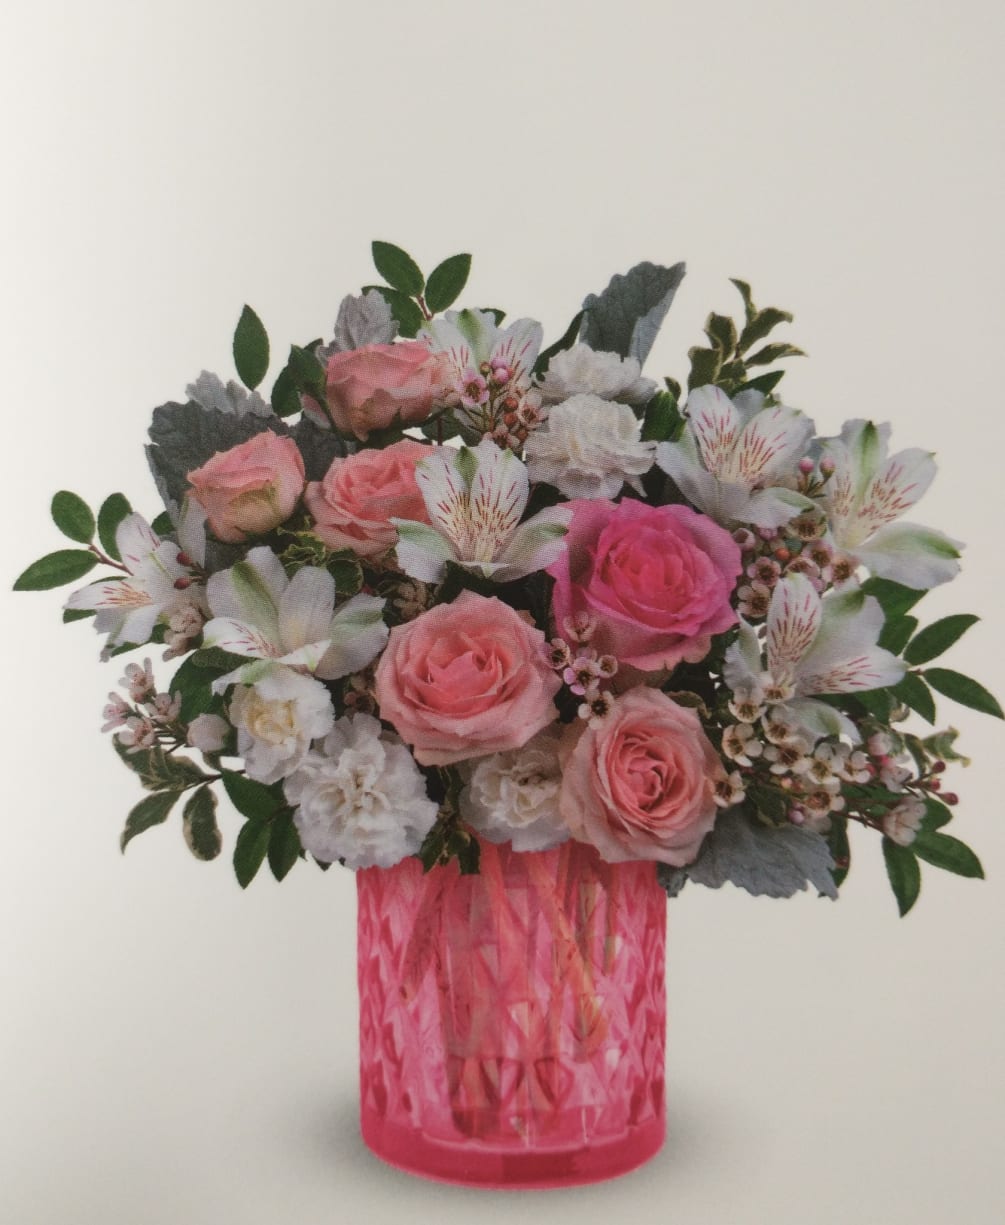 Pretty pink flowers with white accent flowers in a beautiful pink glass